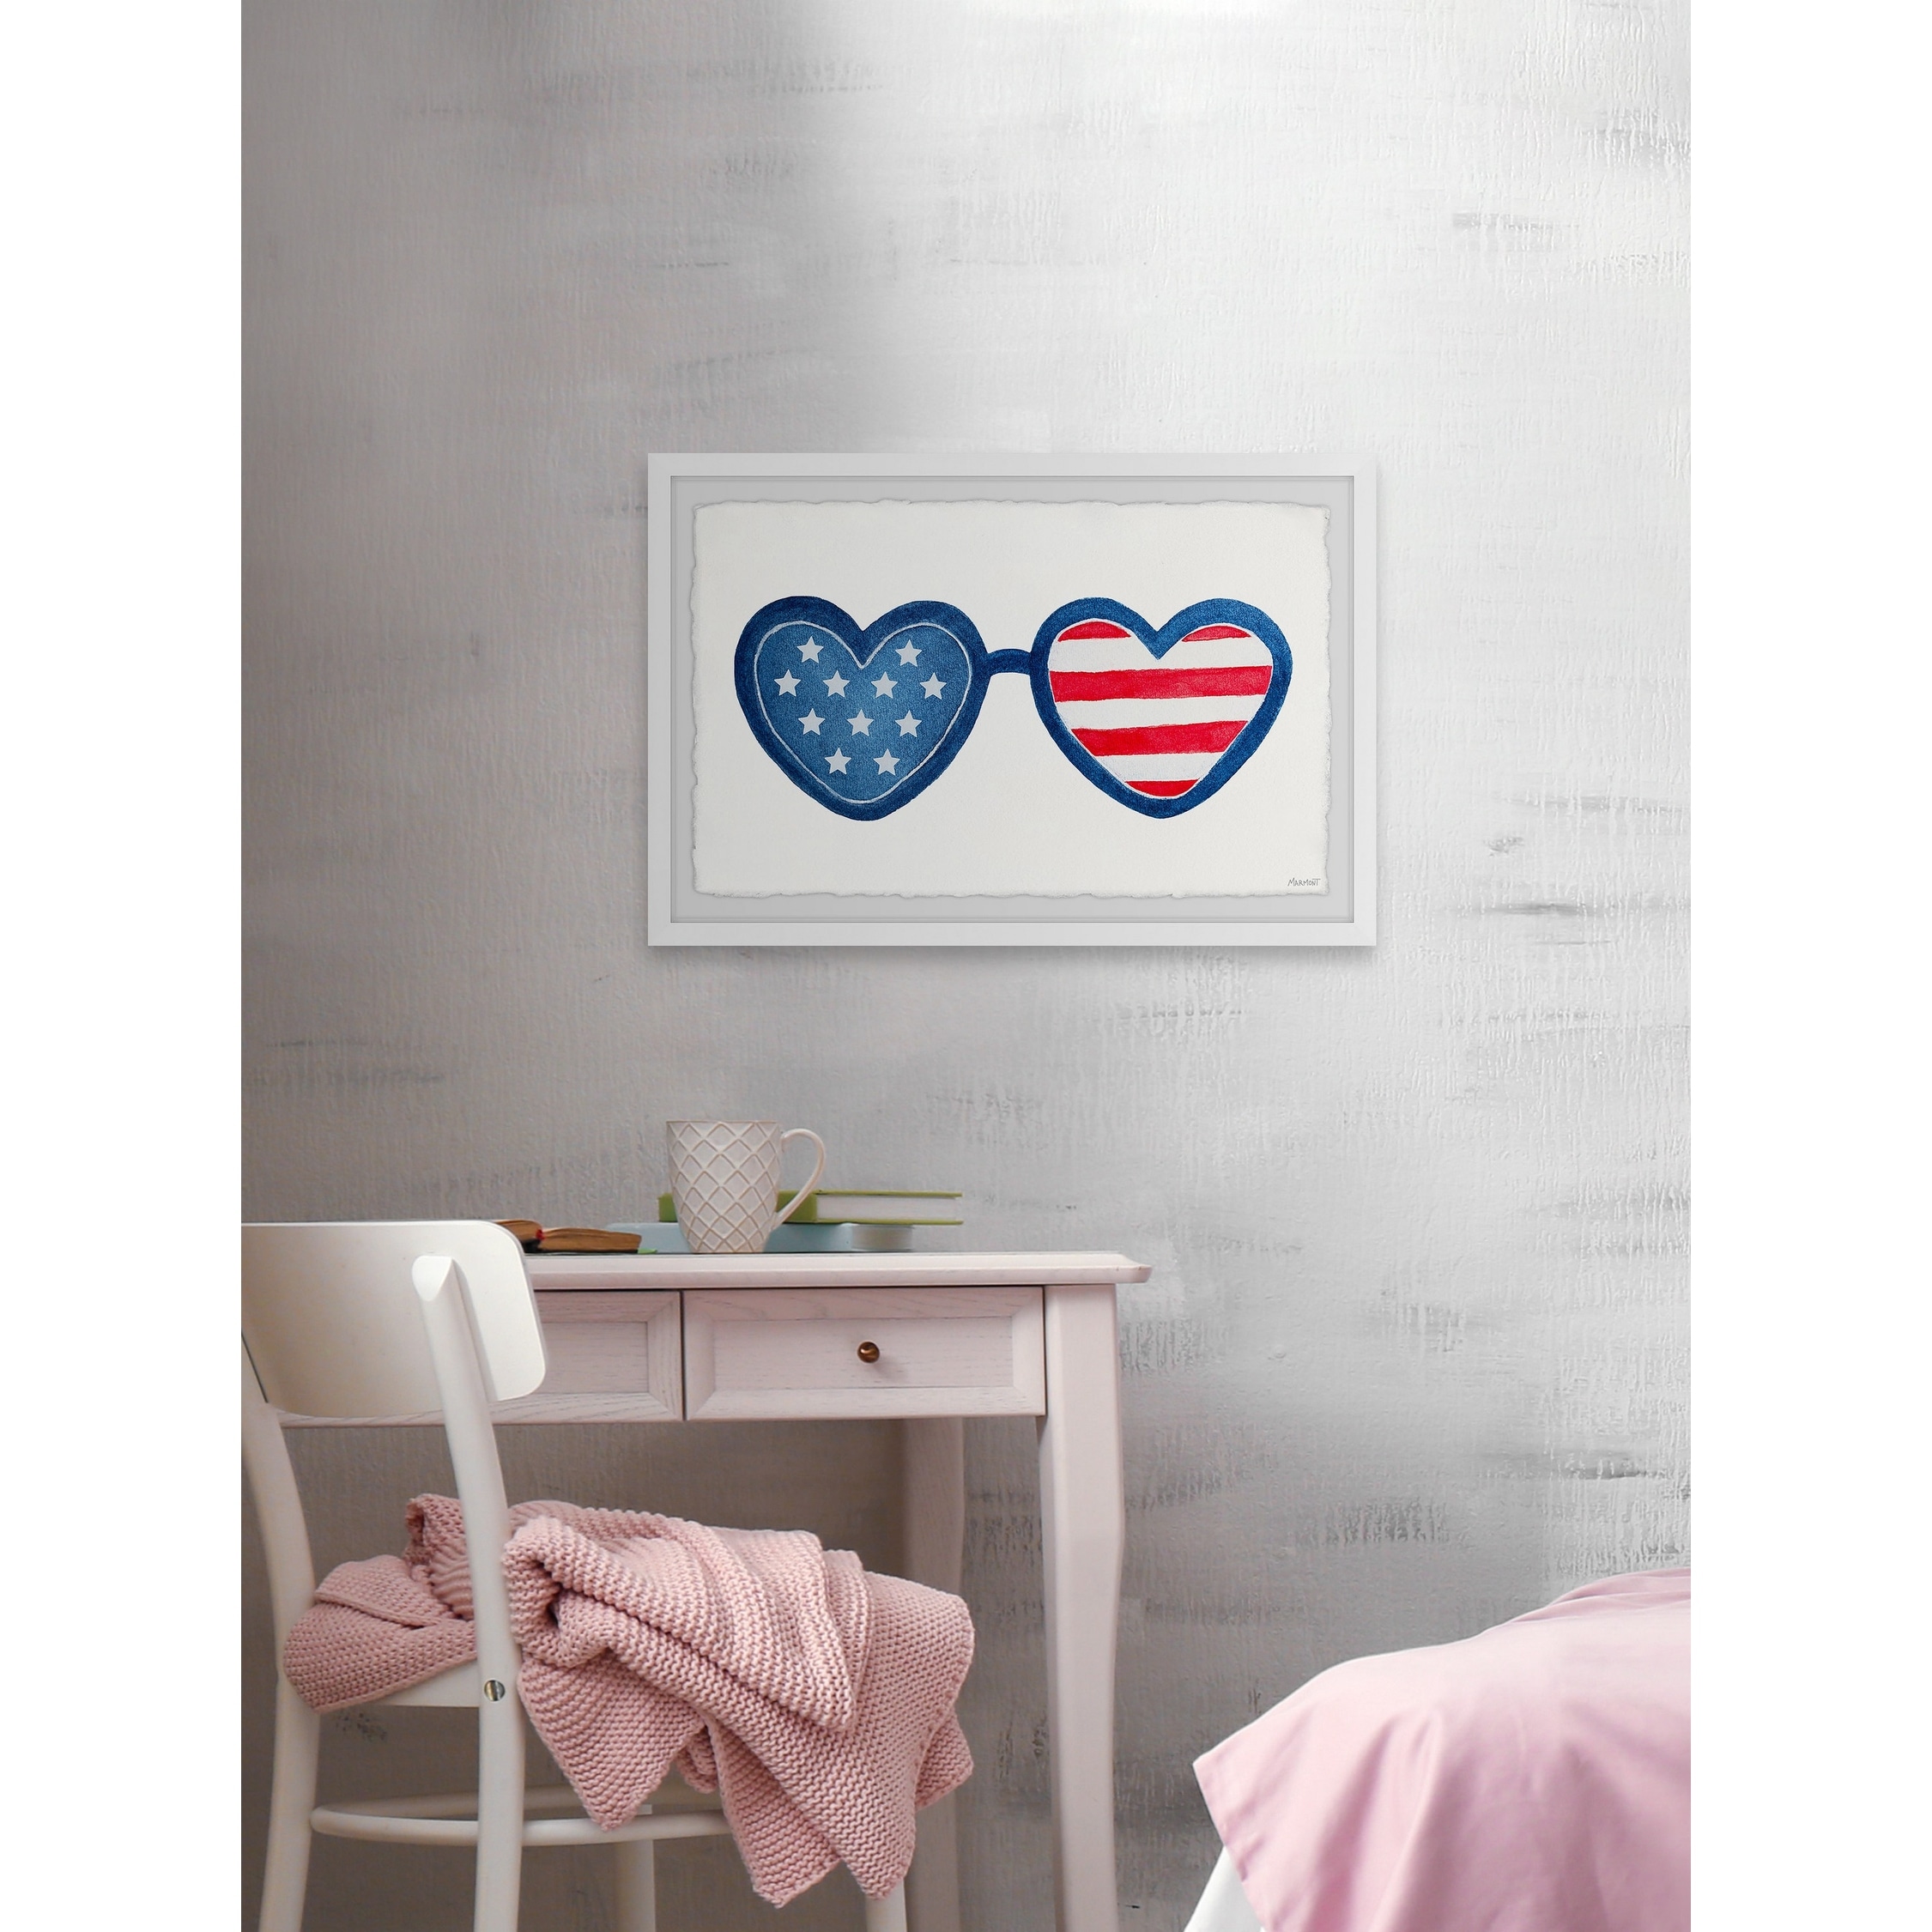 On Bath Sale - Painting & Heart Framed Bed 33148342 Sunglasses\' Beyond - Print -